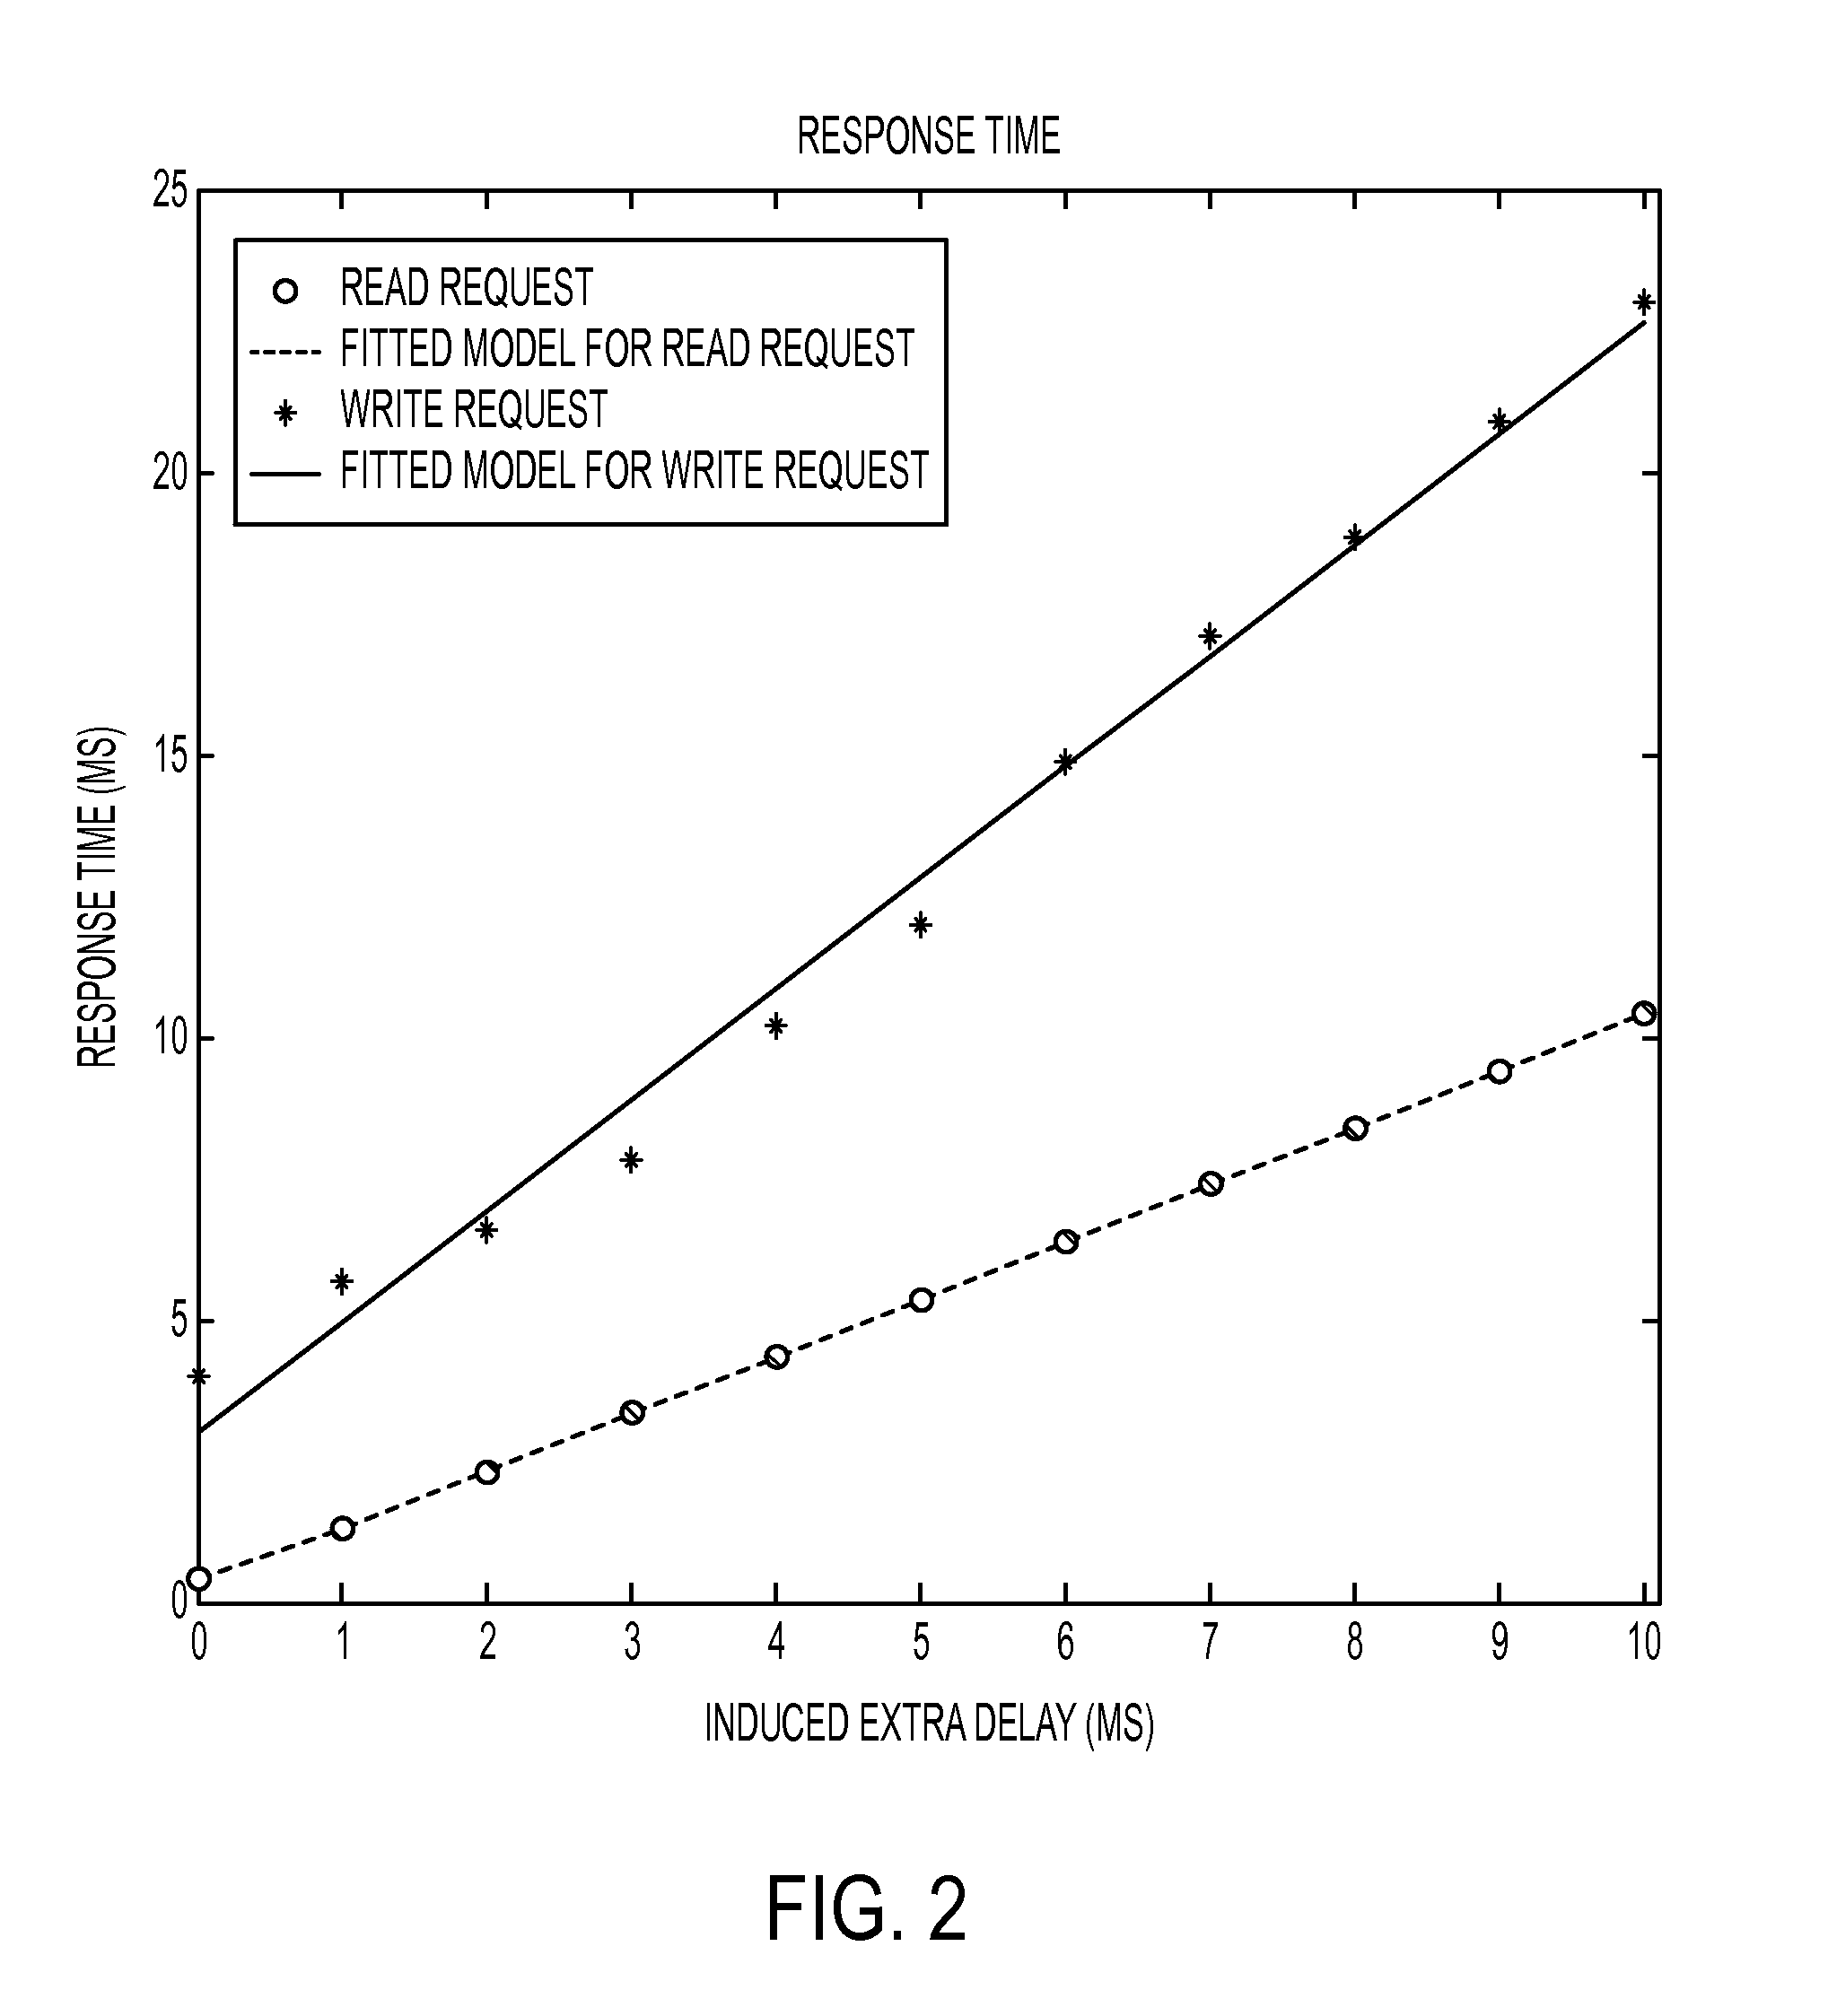 Method to apply perturbation for resource bottleneck detection and capacity planning